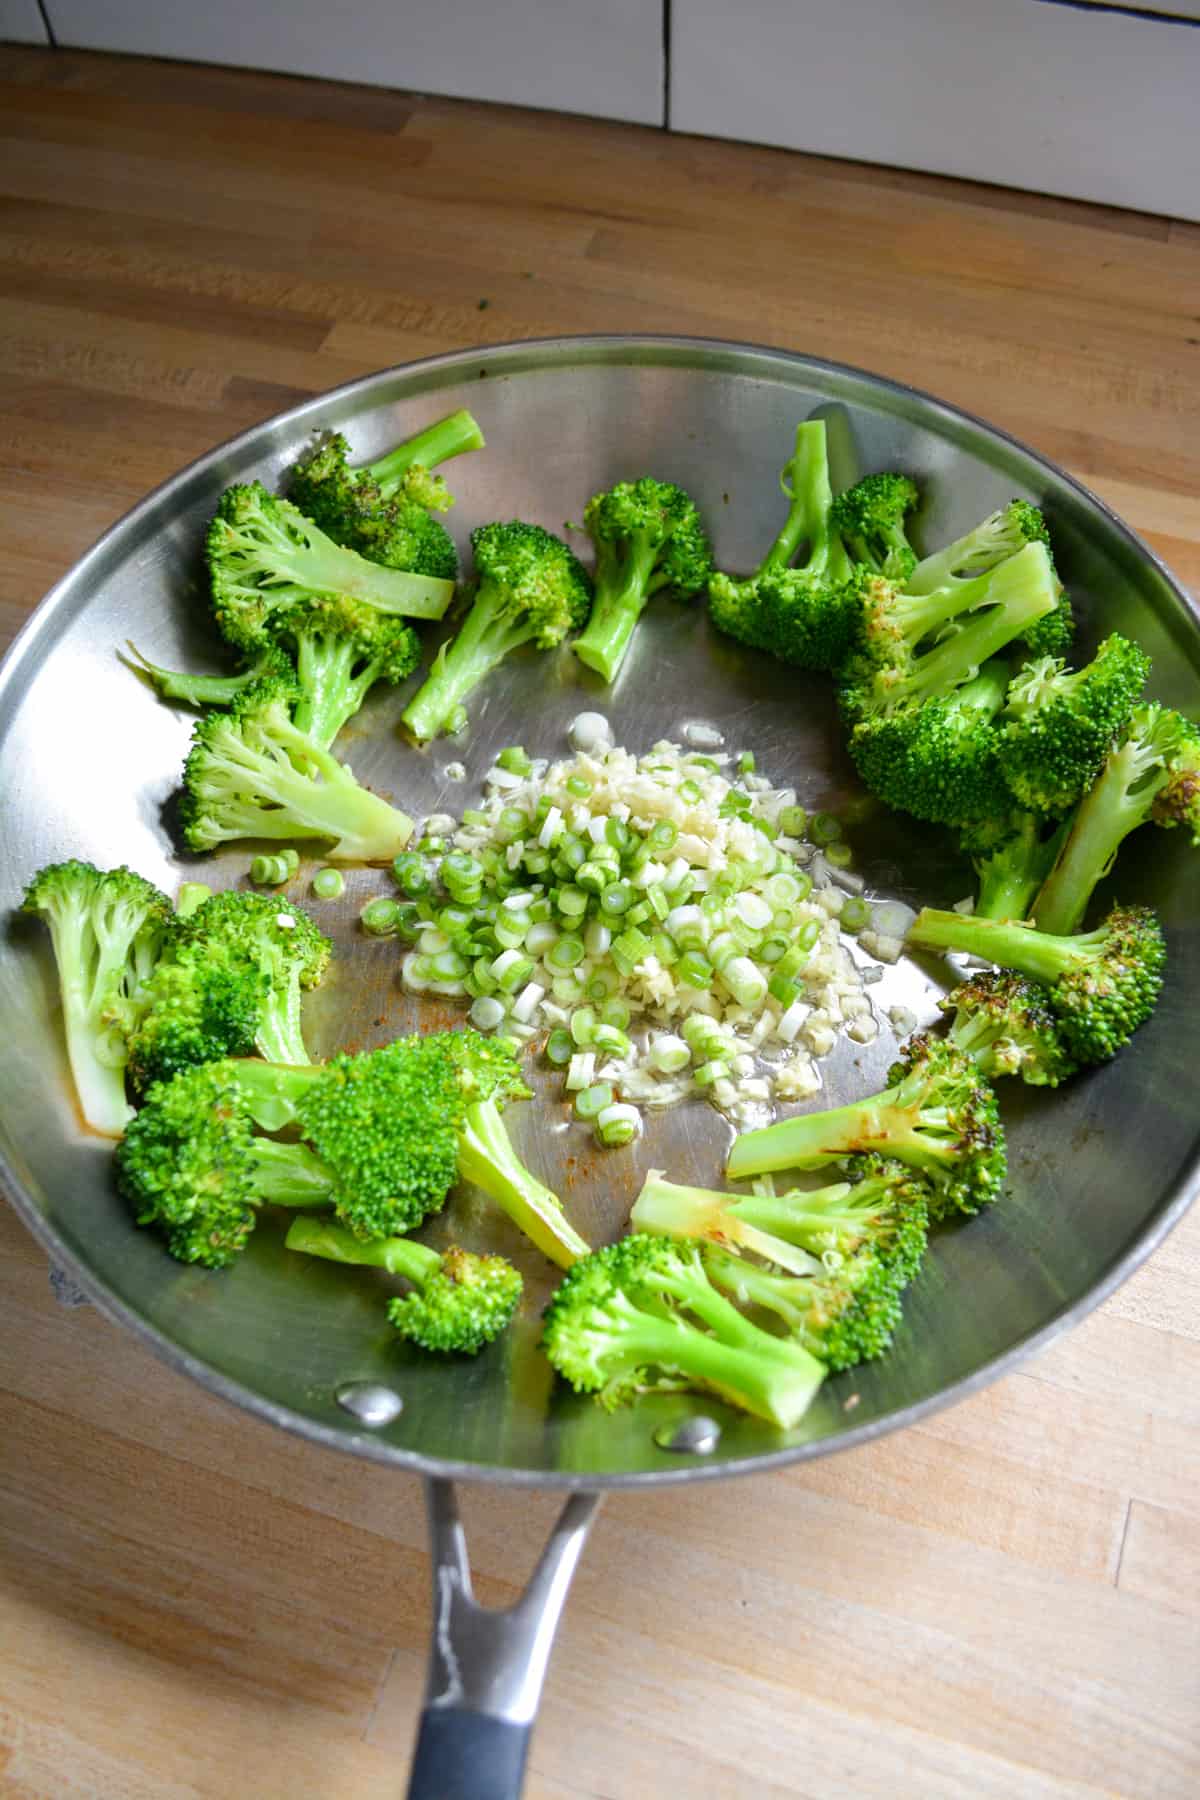 Broccoli florets pushed to the sides of the skillet with chopped garlic, ginger and scallion in the center.